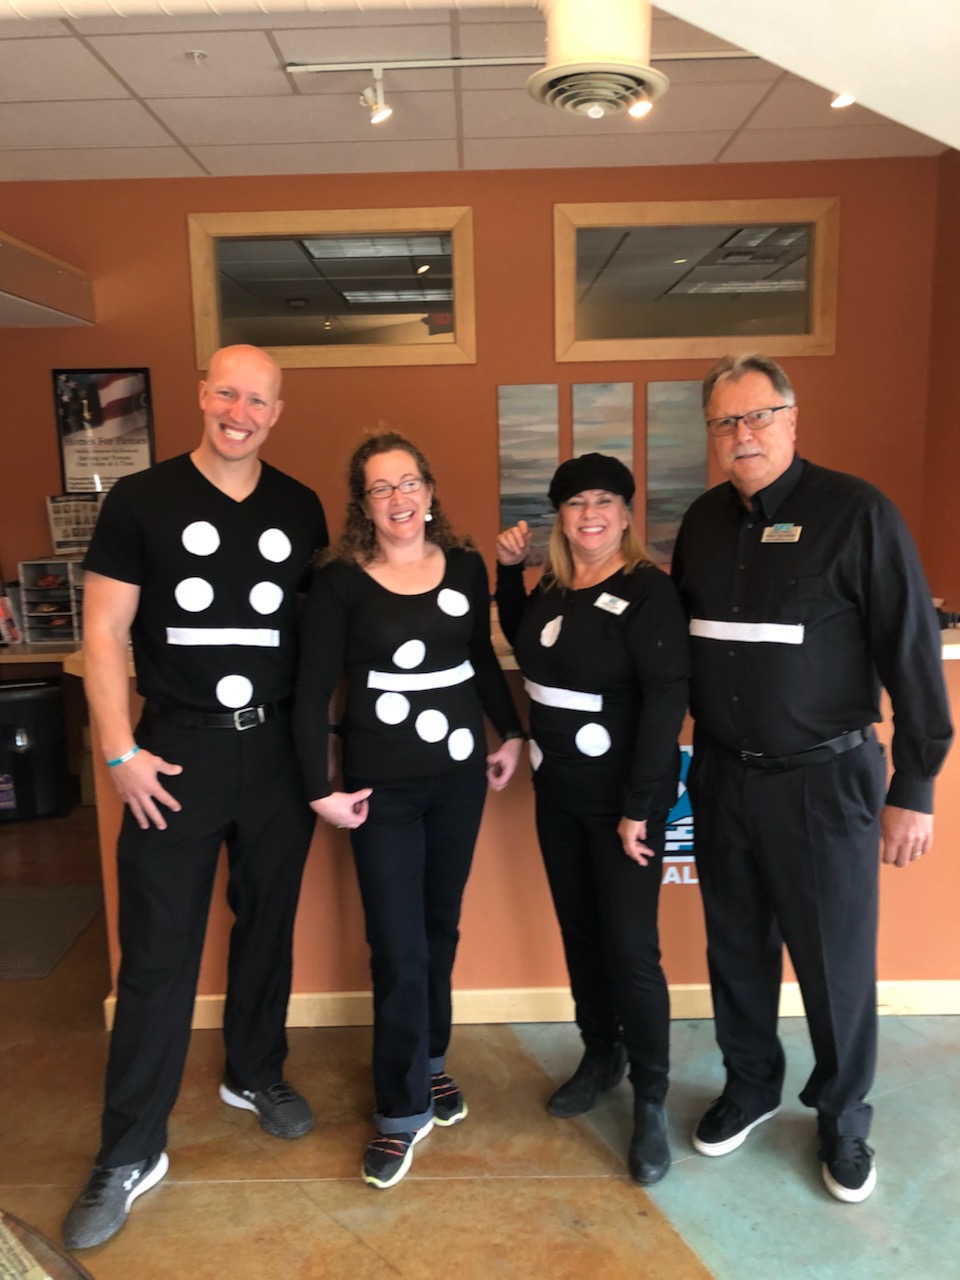 Happy Halloween from the EXIT Team